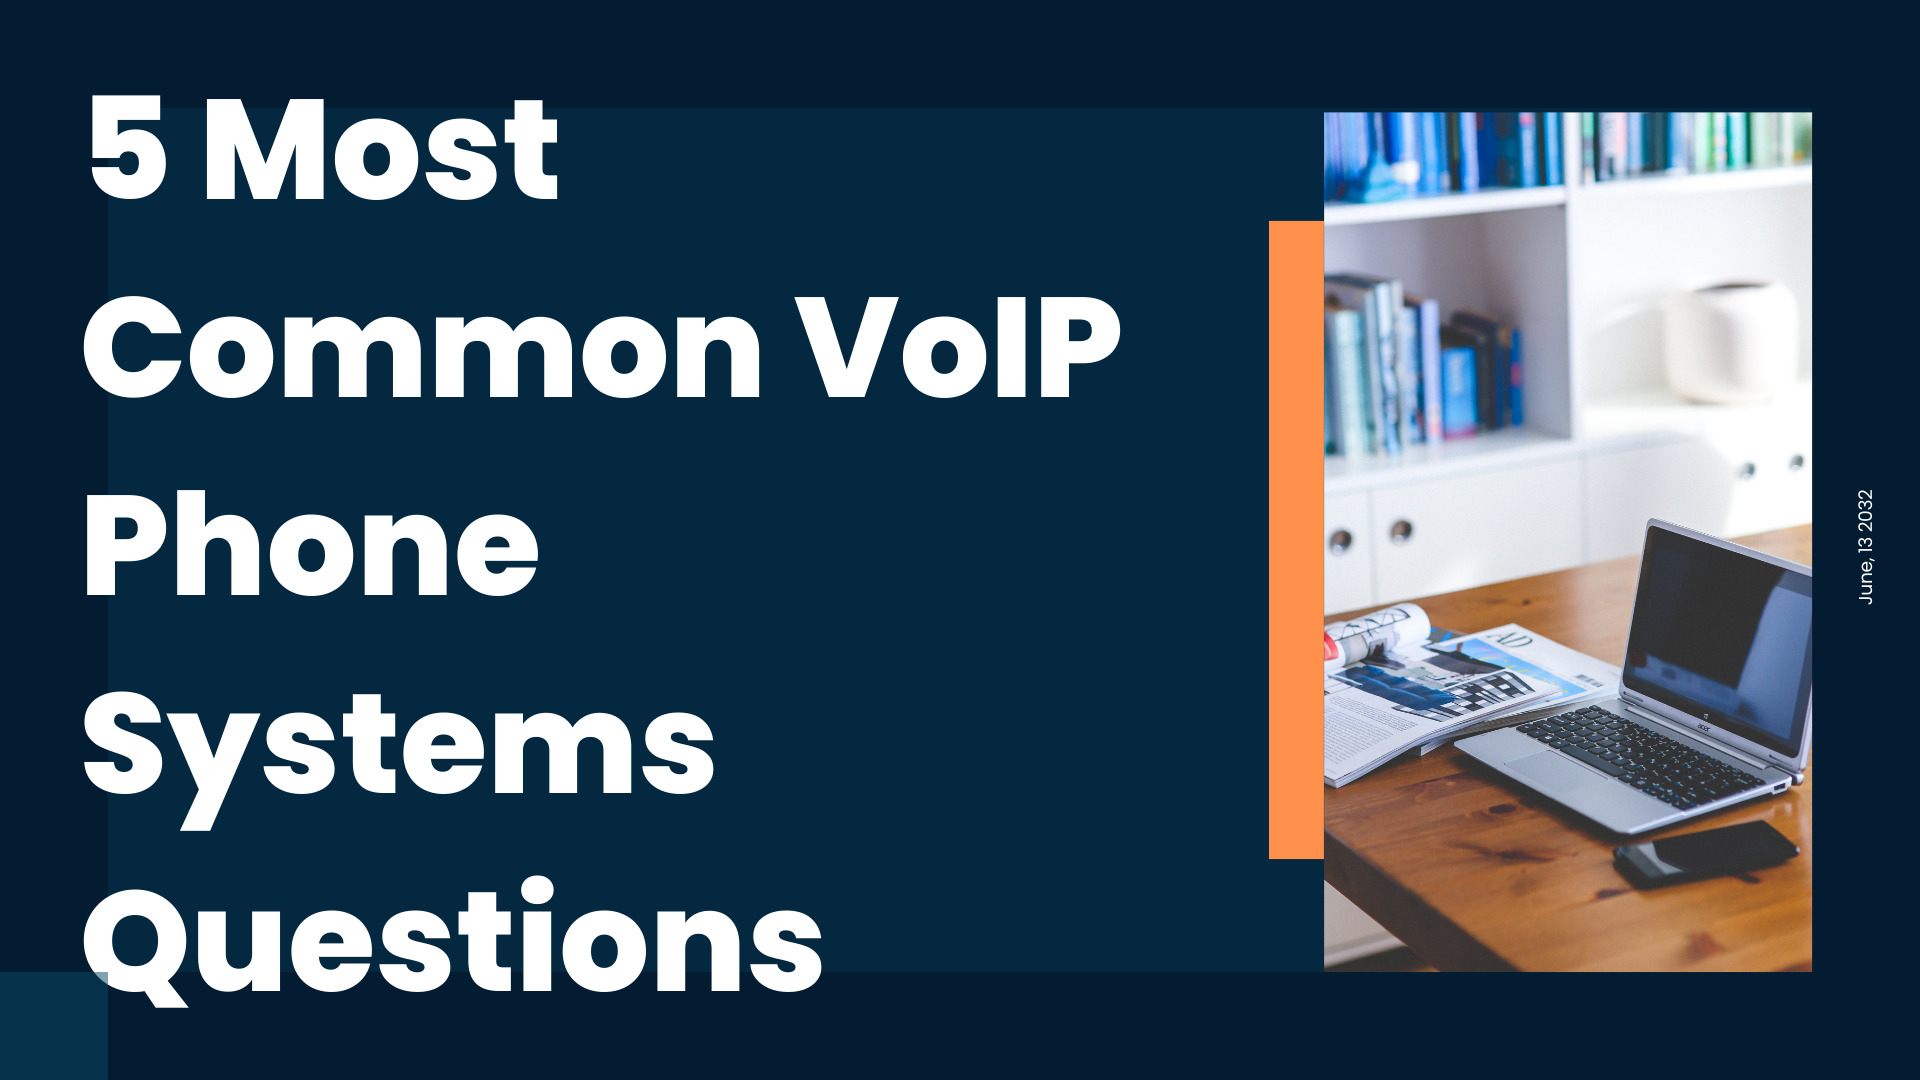 5 Most Common VoIP Phone Systems